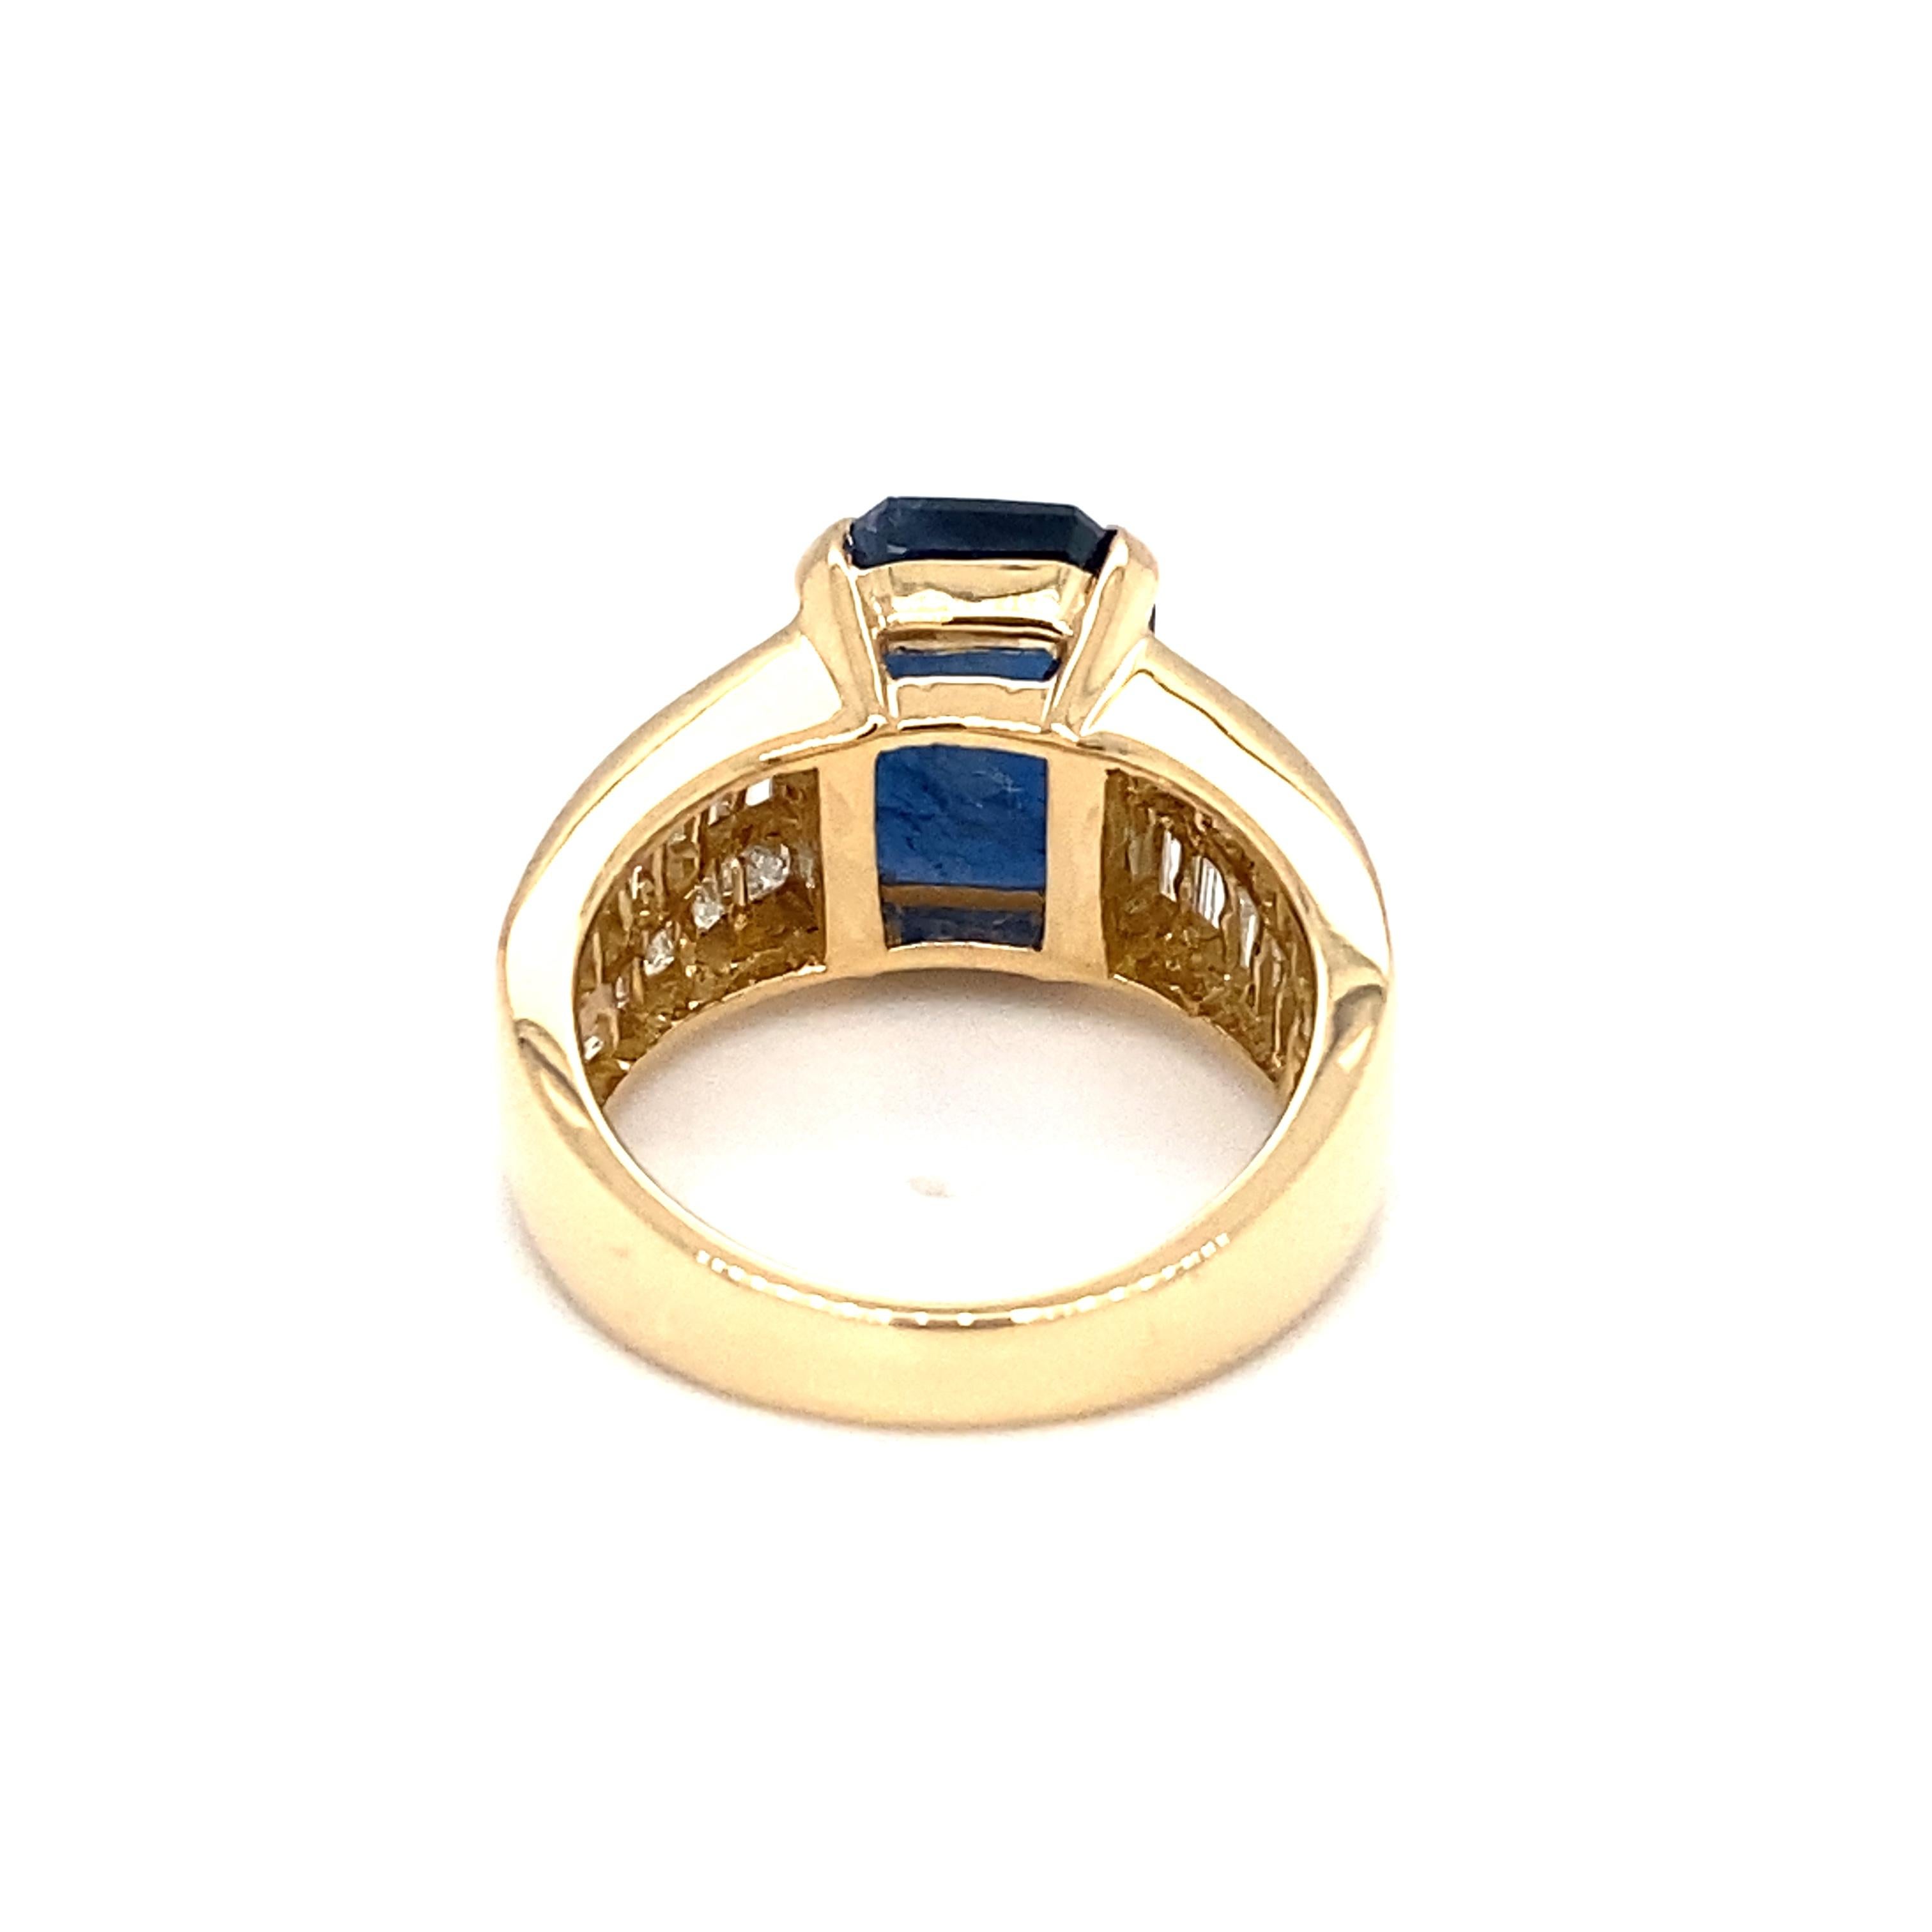 Item Details: This spectacular ring features a center GIA certified Burma sapphire (report # 6227539182) and accent VVS diamonds.

Circa: 2000s
Metal Type: 18 Karat Yellow Gold
Weight: 9.9 grams
Size: US 6.5, resizable

Diamond Details:

Carat: 2.0